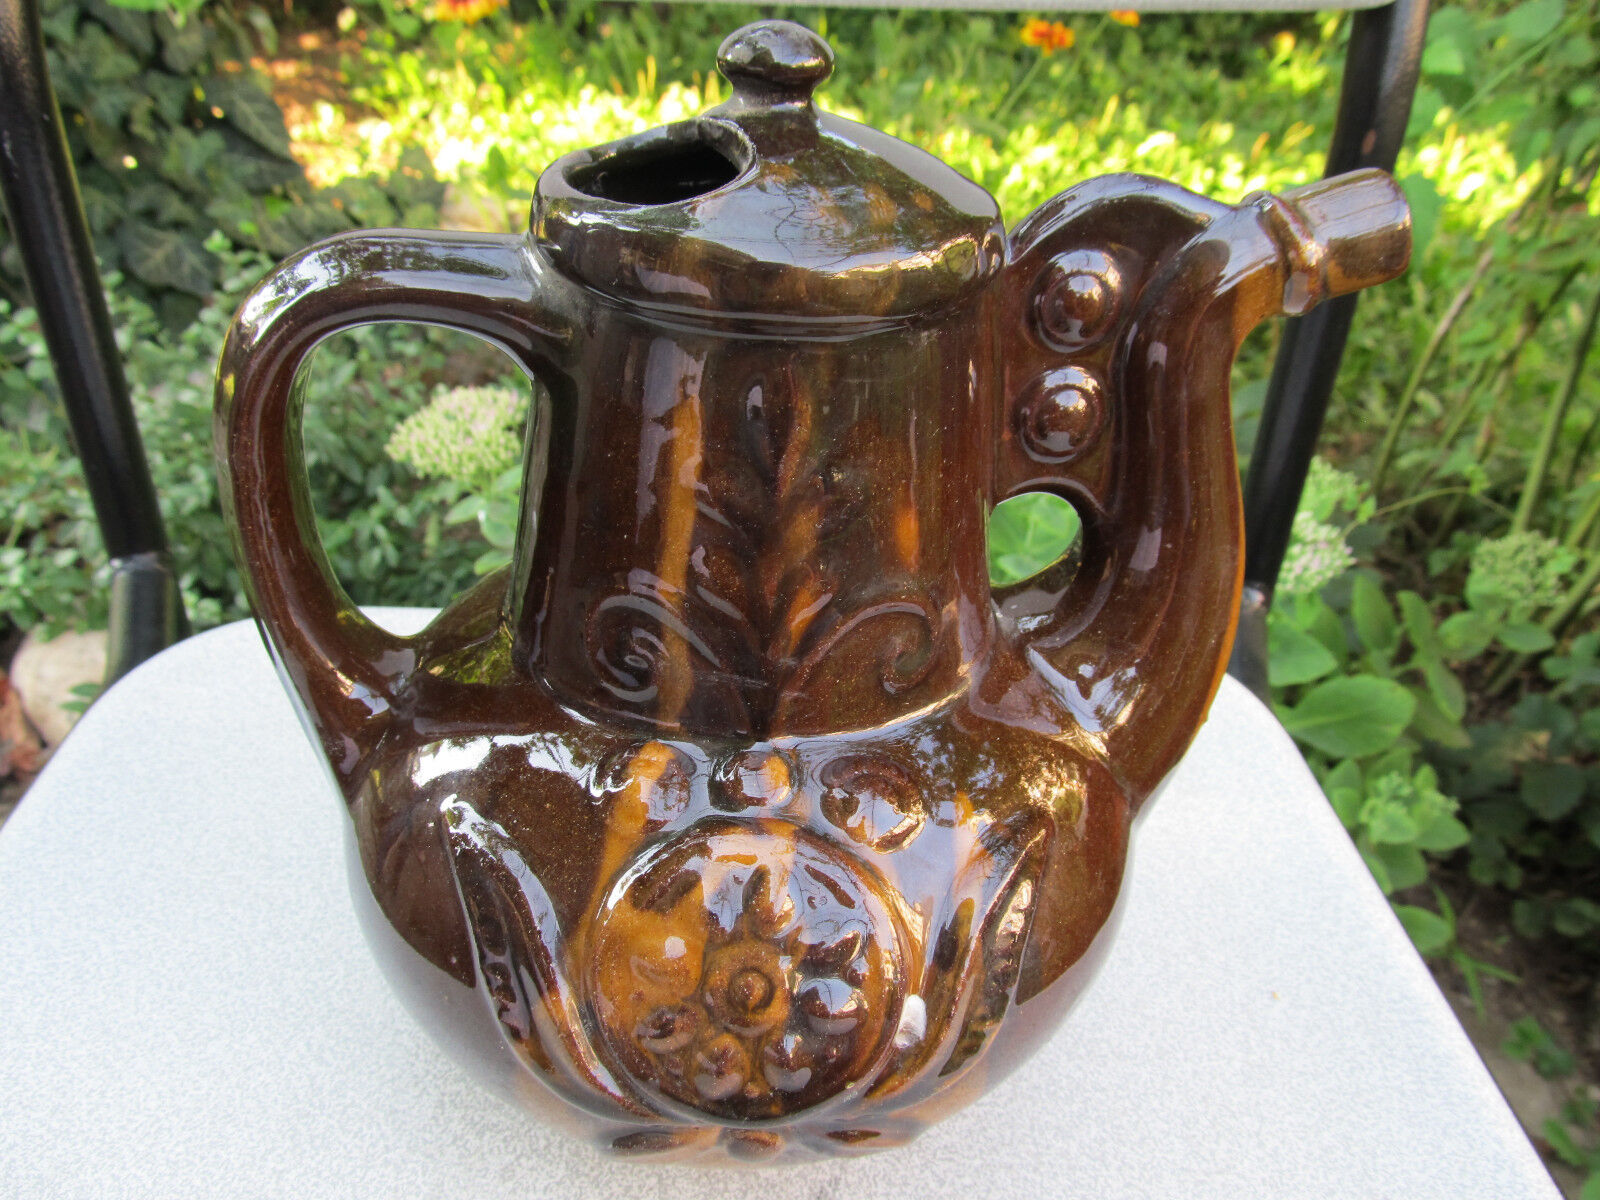 VINTAGE OLD GLAZED REDWARE CHARMING BROWN POTERY PITCHER JUG FOR RED WINE